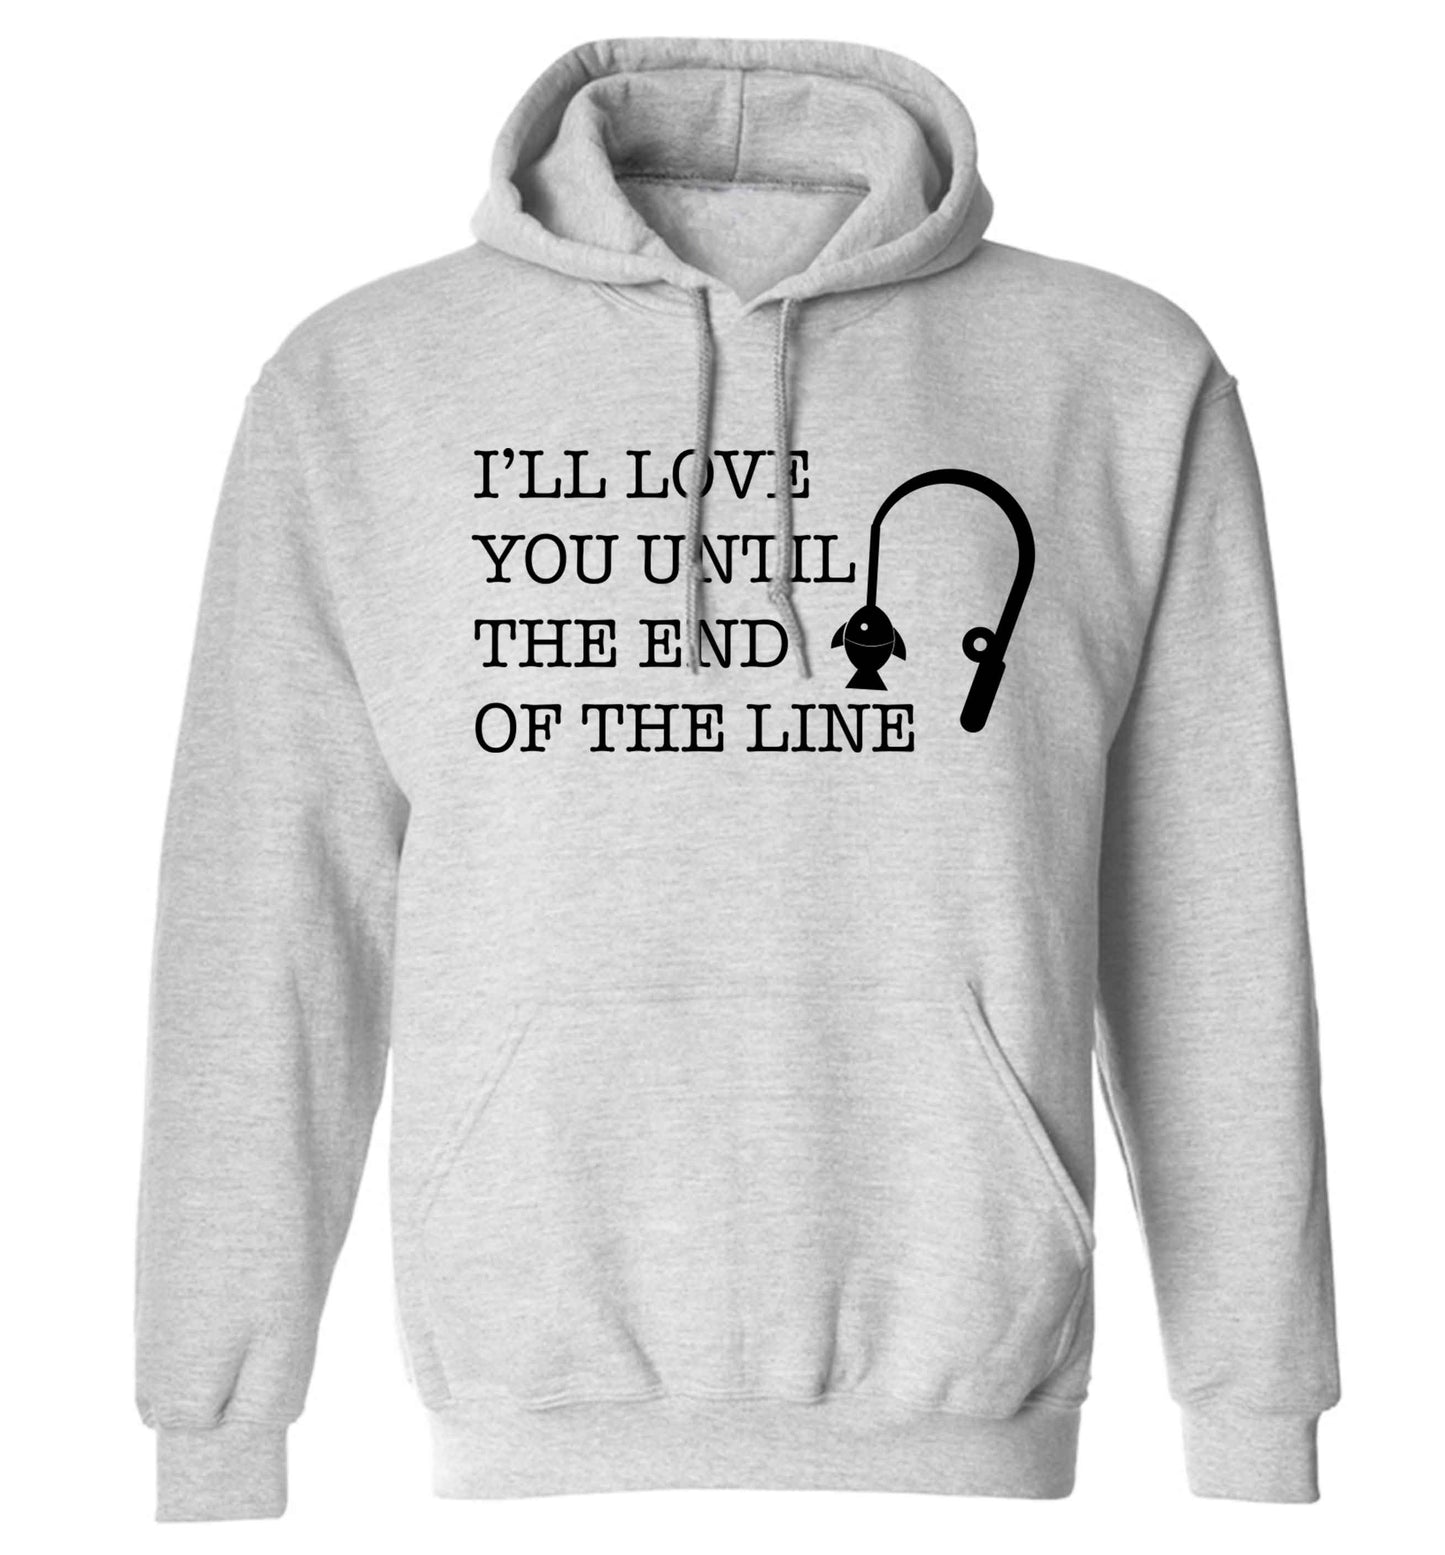 I'll love you until the end of the line adults unisex grey hoodie 2XL